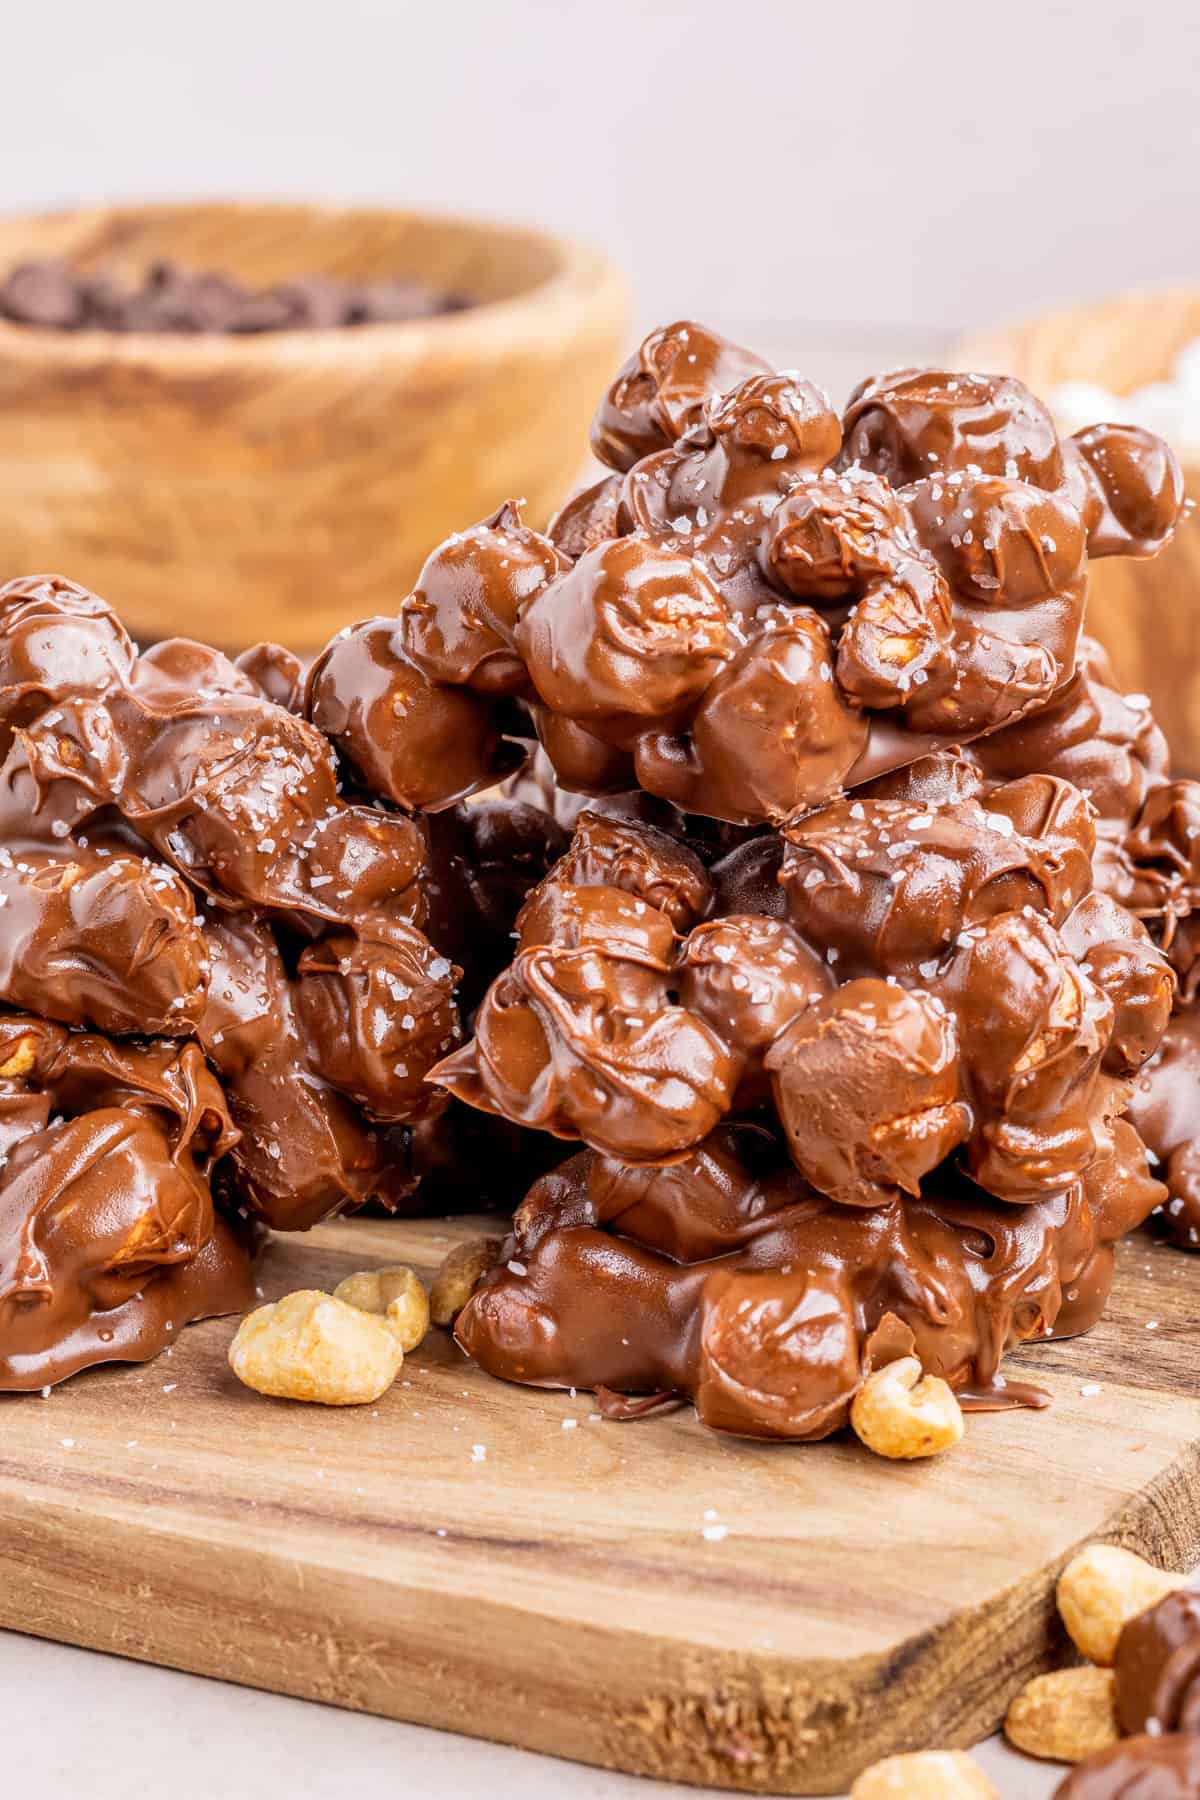 Chocolate peanut and marshmallow clusters on wooden board.